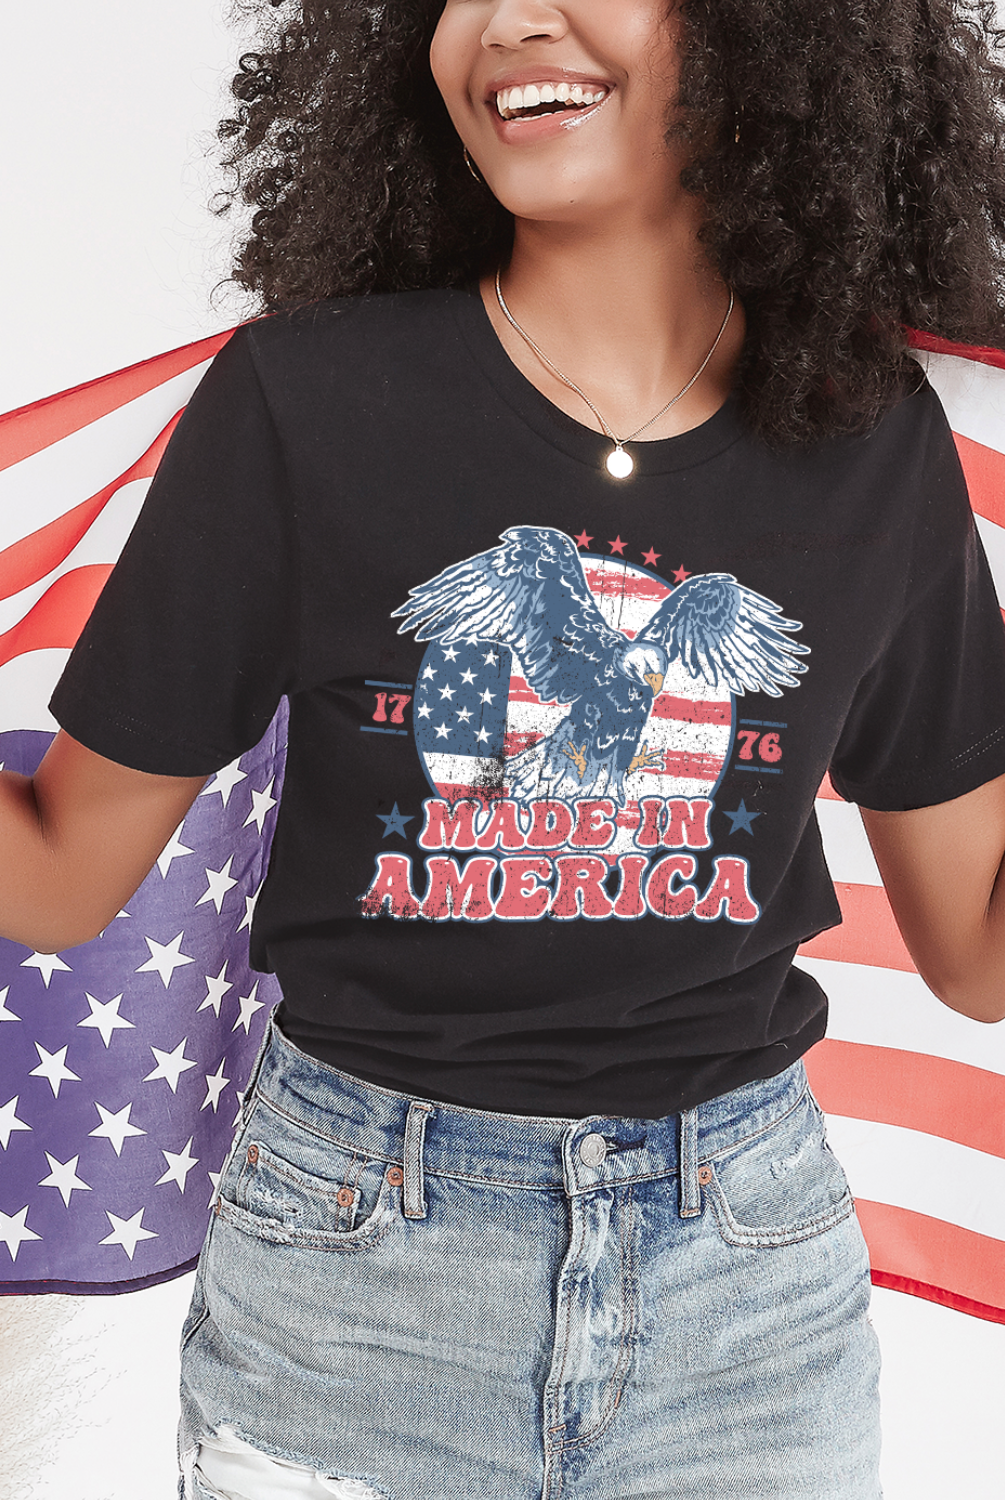 1776. Made in America Vintage America soft shirt with an eagle on it. Distressed. Color is charcoal.